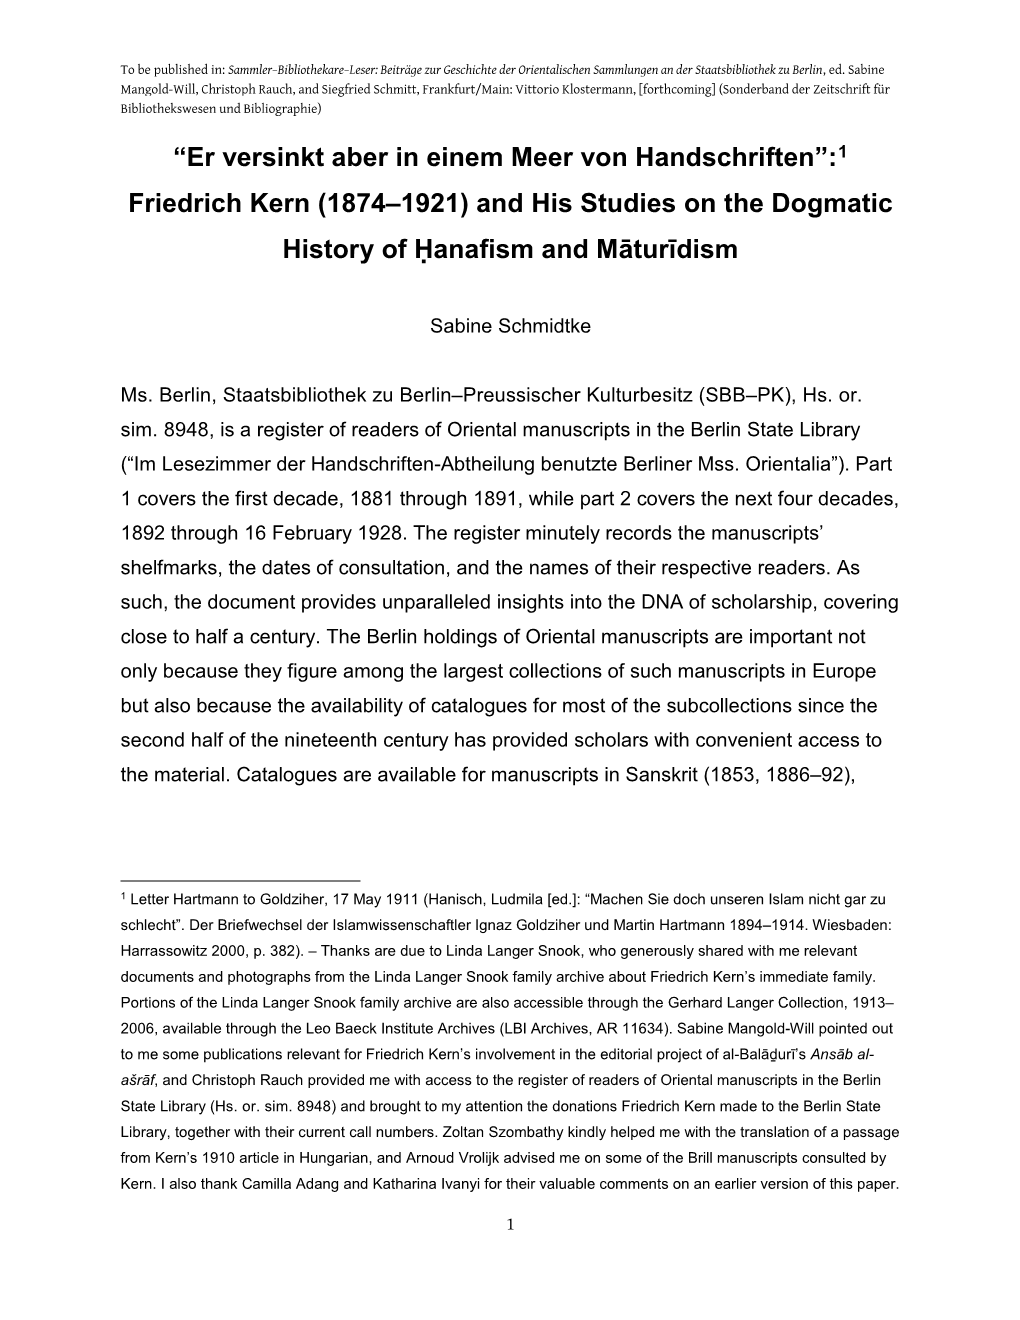 1 Friedrich Kern (1874–1921) and His Studies on the Dogmatic History of Ḥanafism and Māturīdism